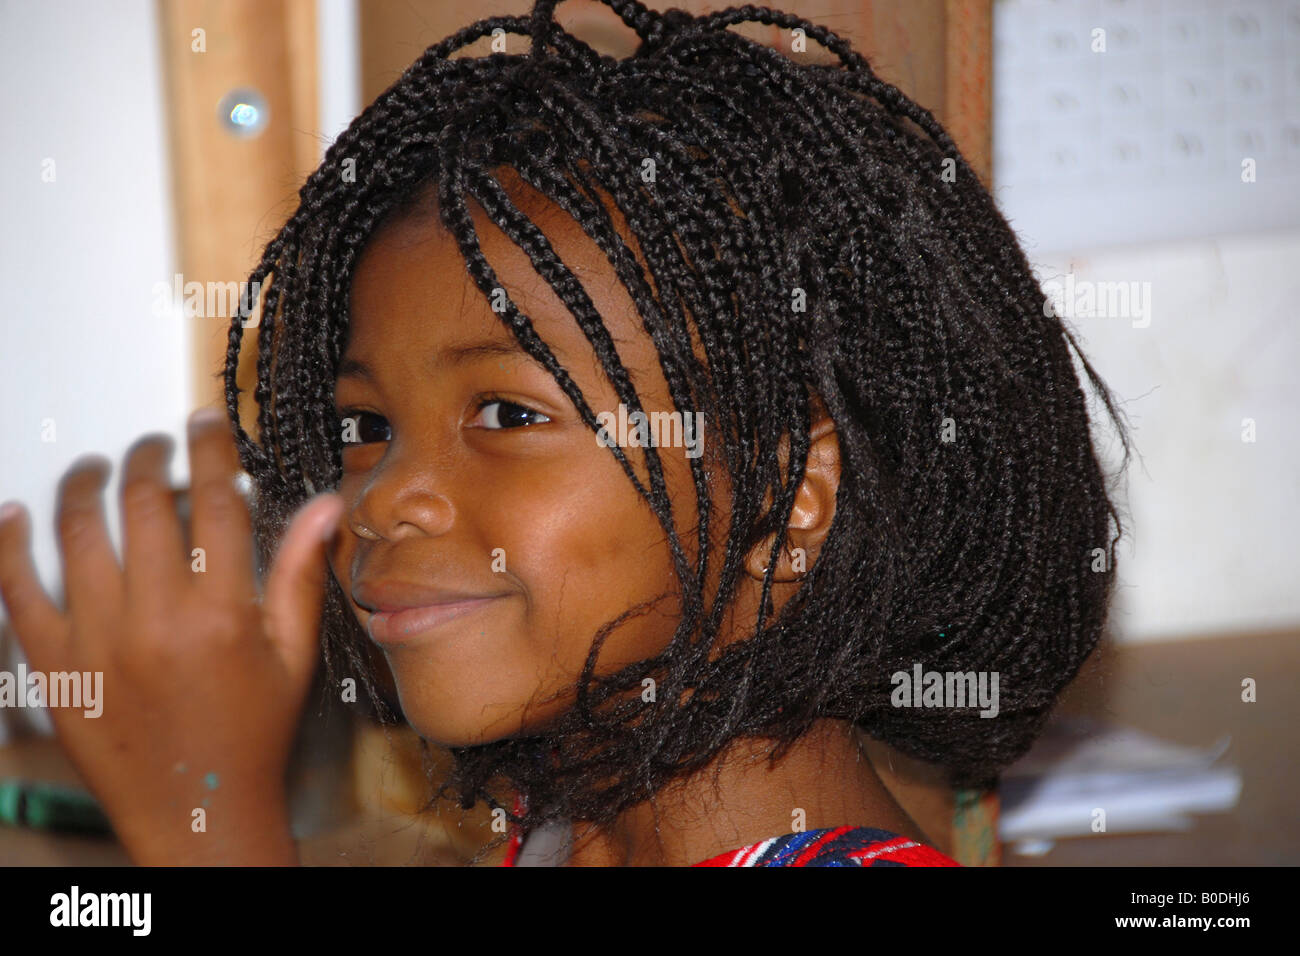 A shy brown eyed girl, with beautiful braided hair. Stock Photo